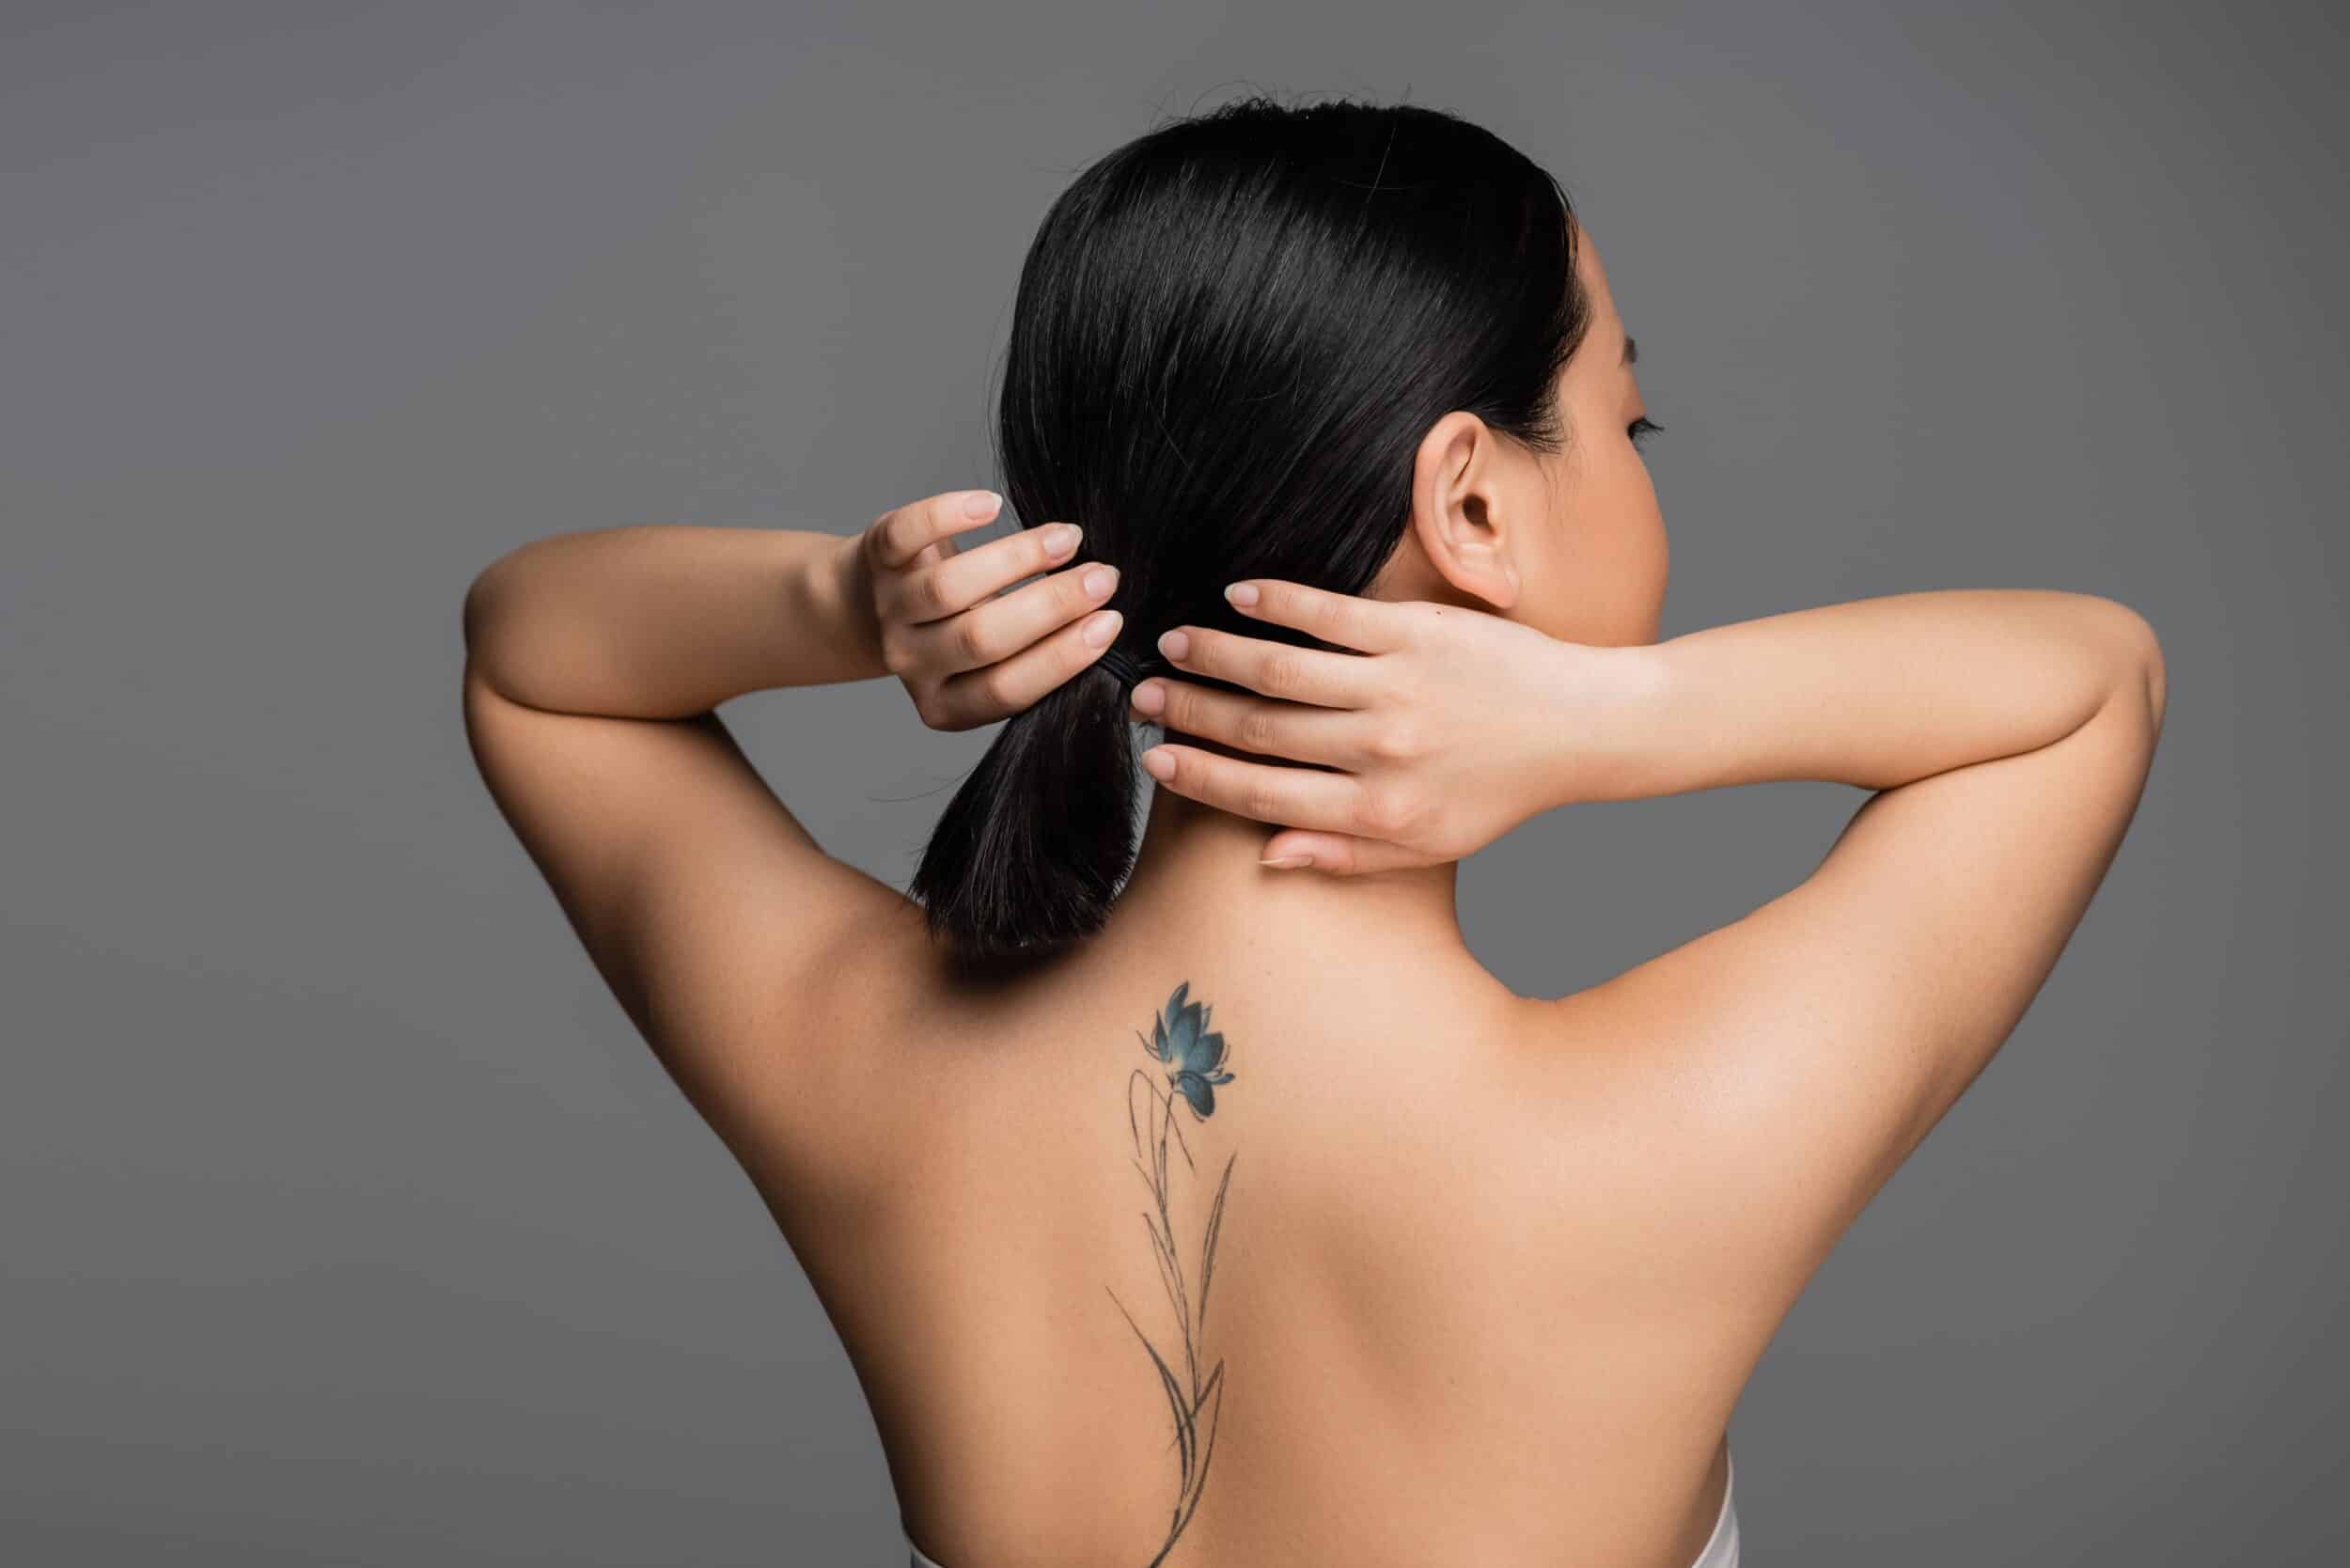 Brunette,Asian,Woman,With,Tattoo,On,Back,Touching,Ponytail,Isolated